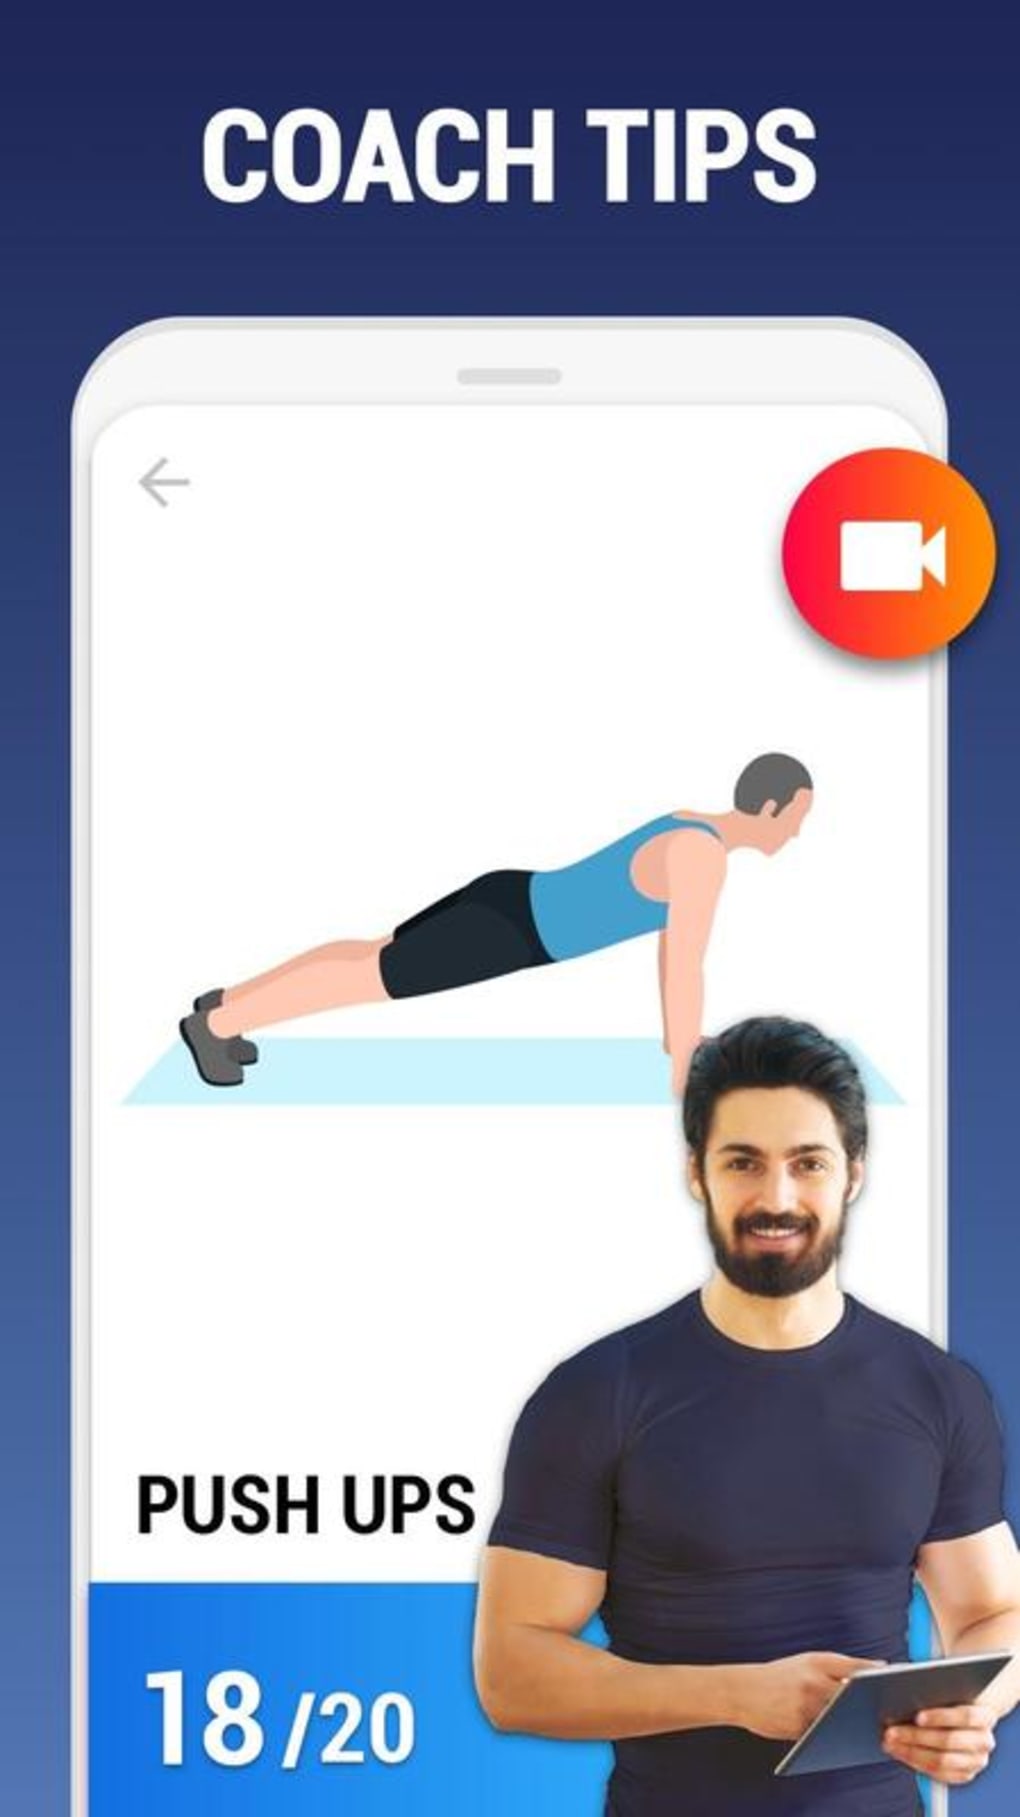 5 Day Arm Workout At Home App Download for Weight Loss